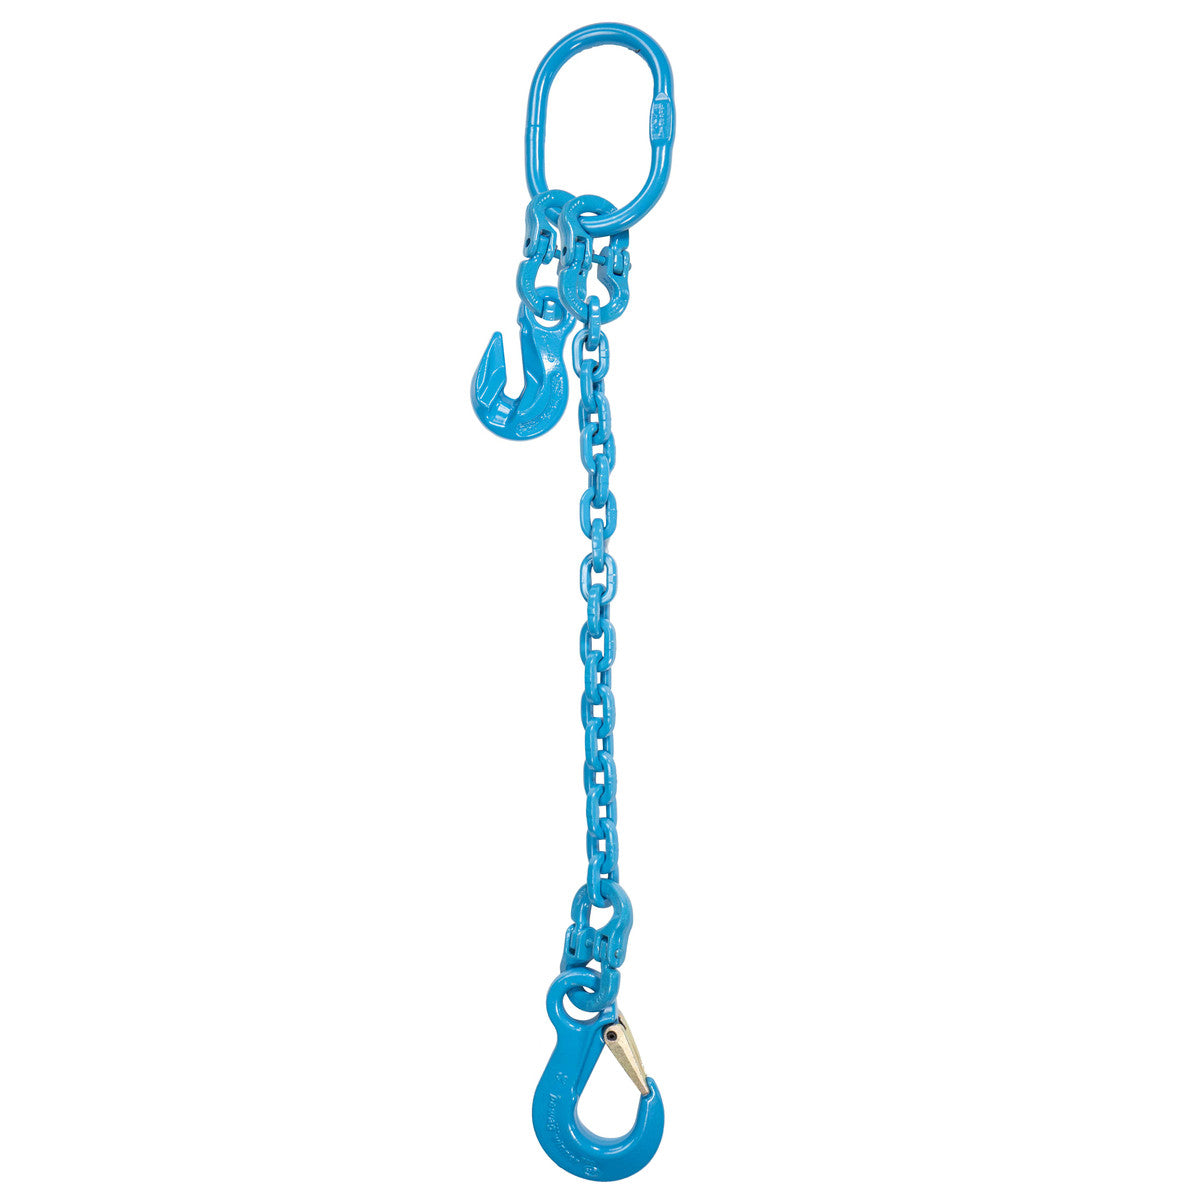 Blue adjustable single-leg chain sling with a sling hook and oblong link at opposing ends of the length of chain.